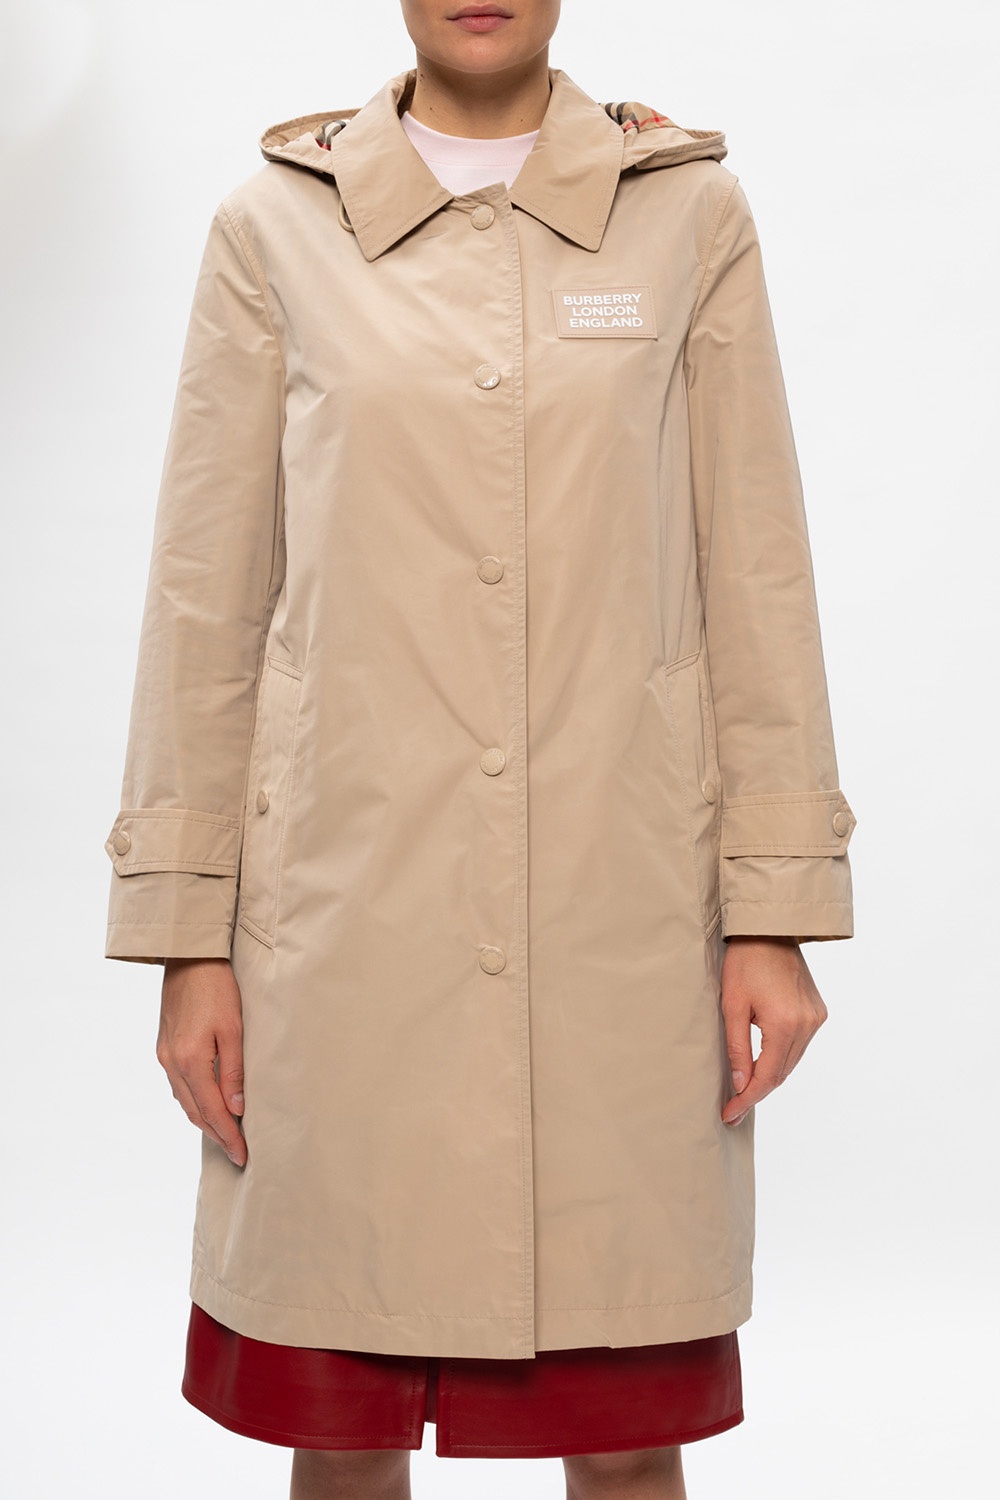 burberry trench coat with hood